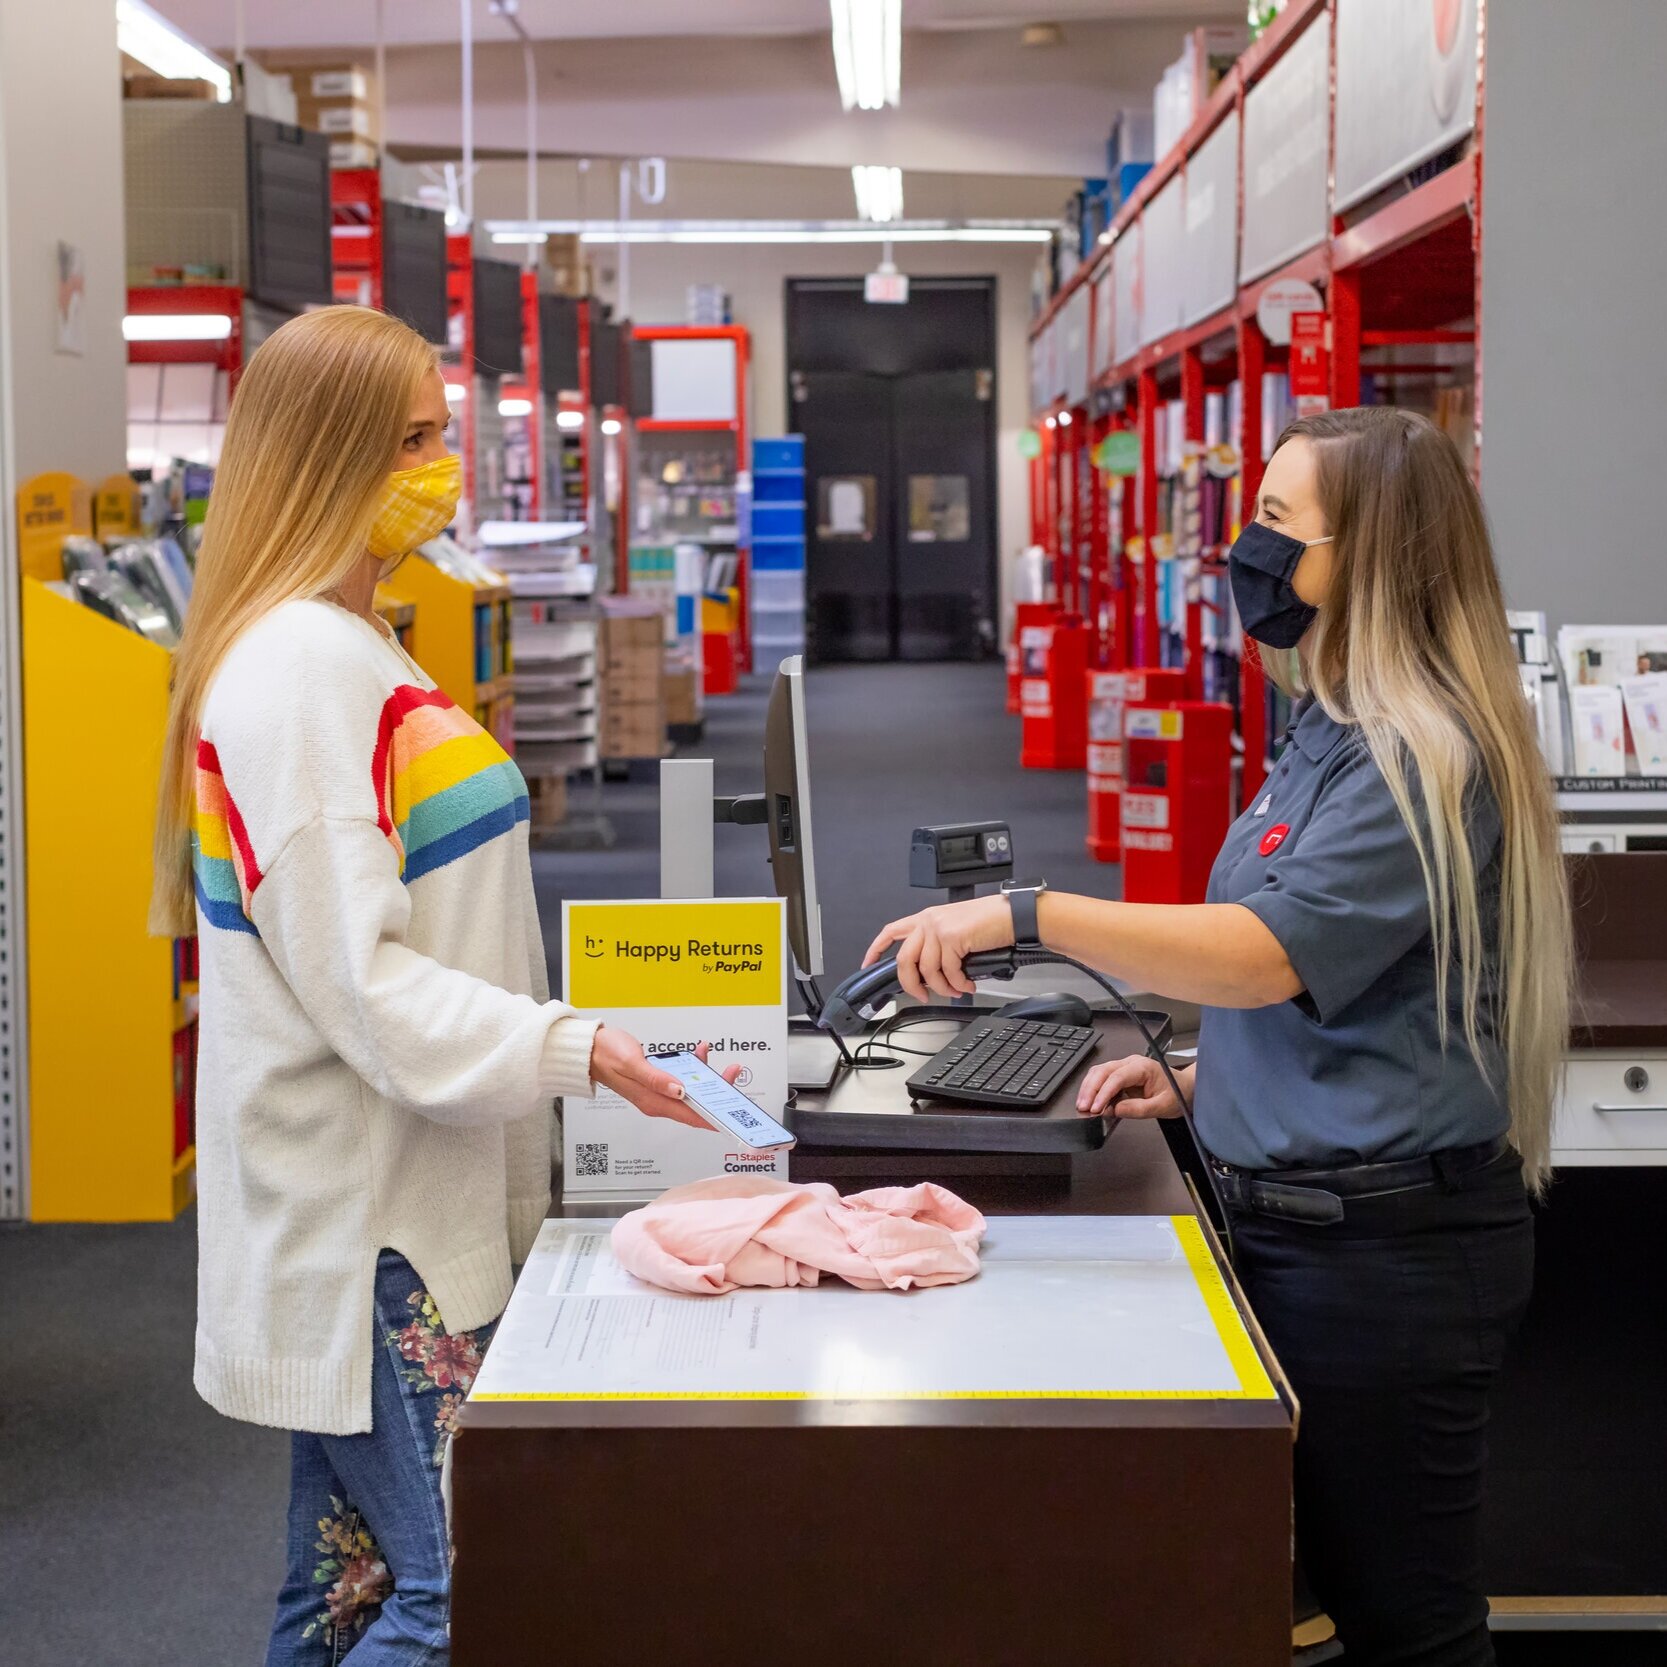 Easy on the Planet: sustainability at Staples 